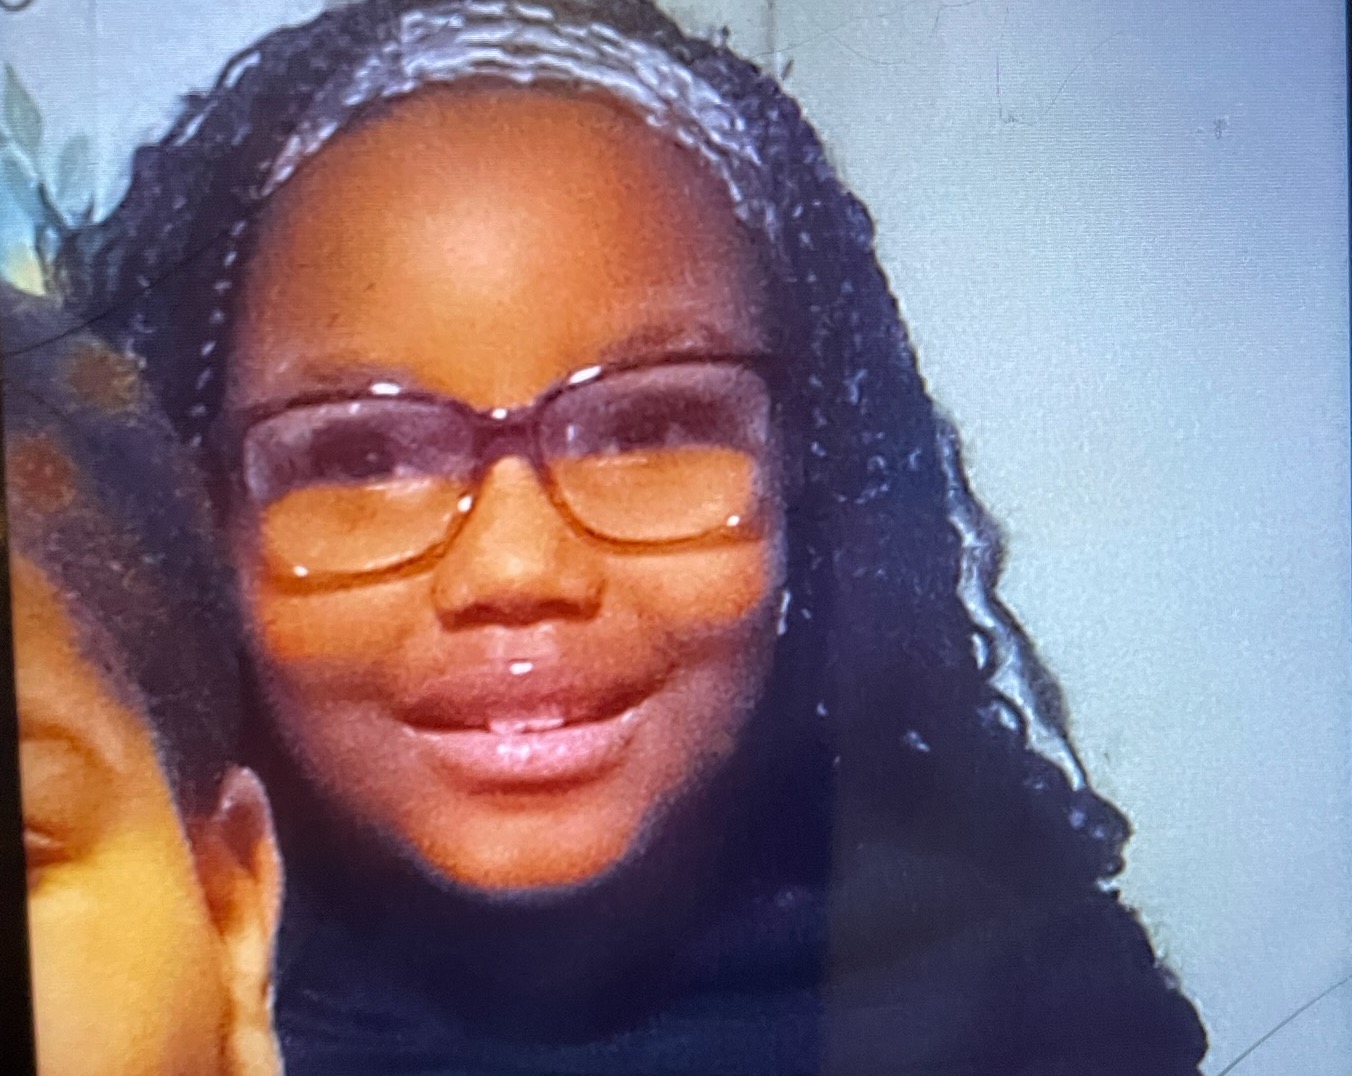 Missing 11 Year Old Girl Found Safe The Columbian 